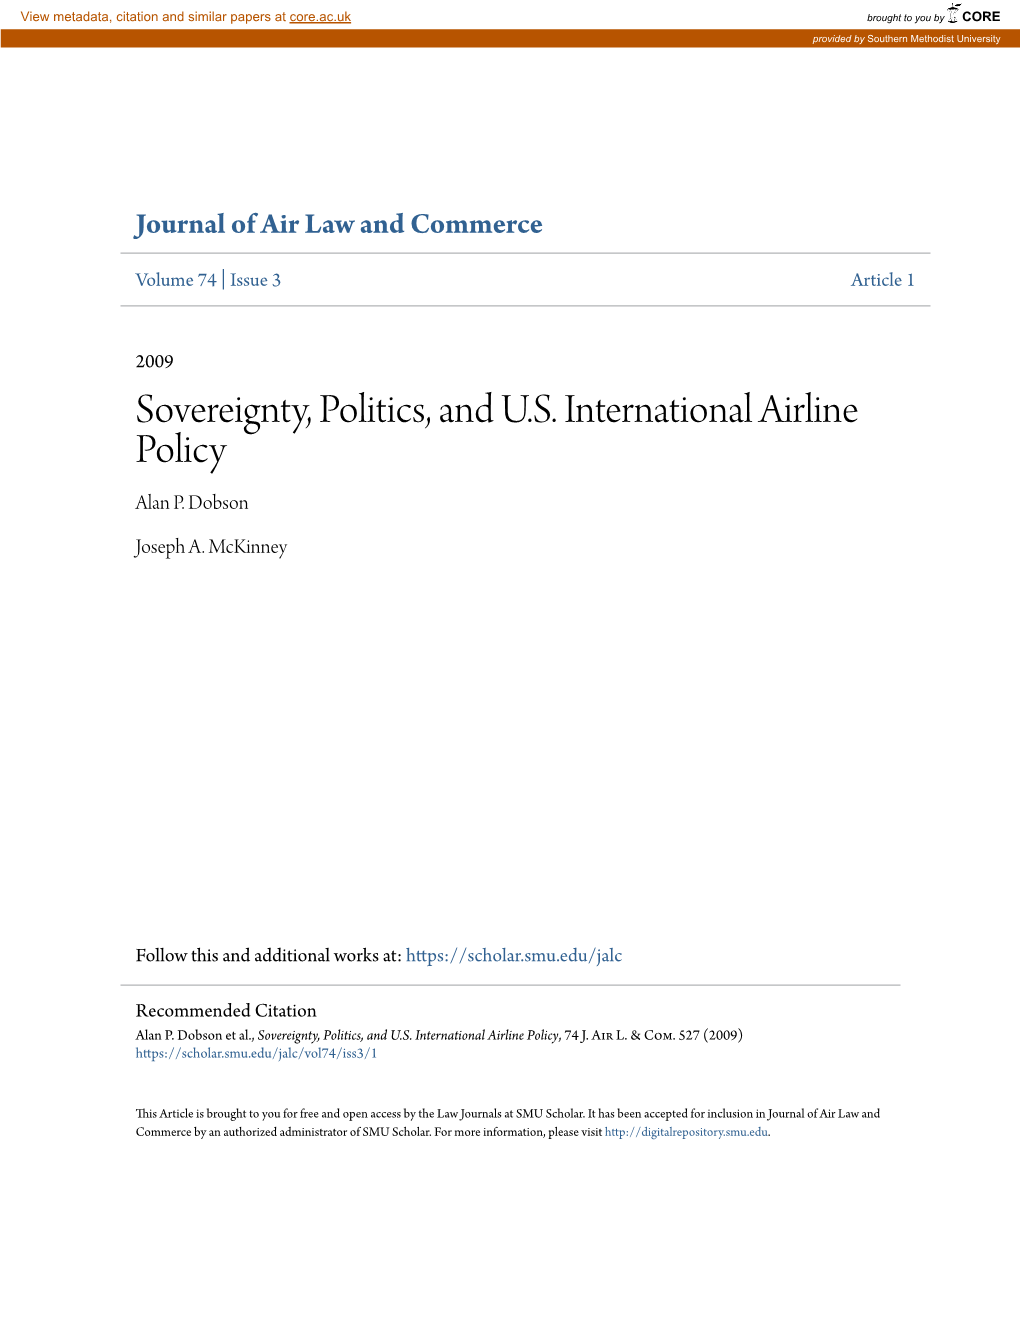 Sovereignty, Politics, and U.S. International Airline Policy Alan P